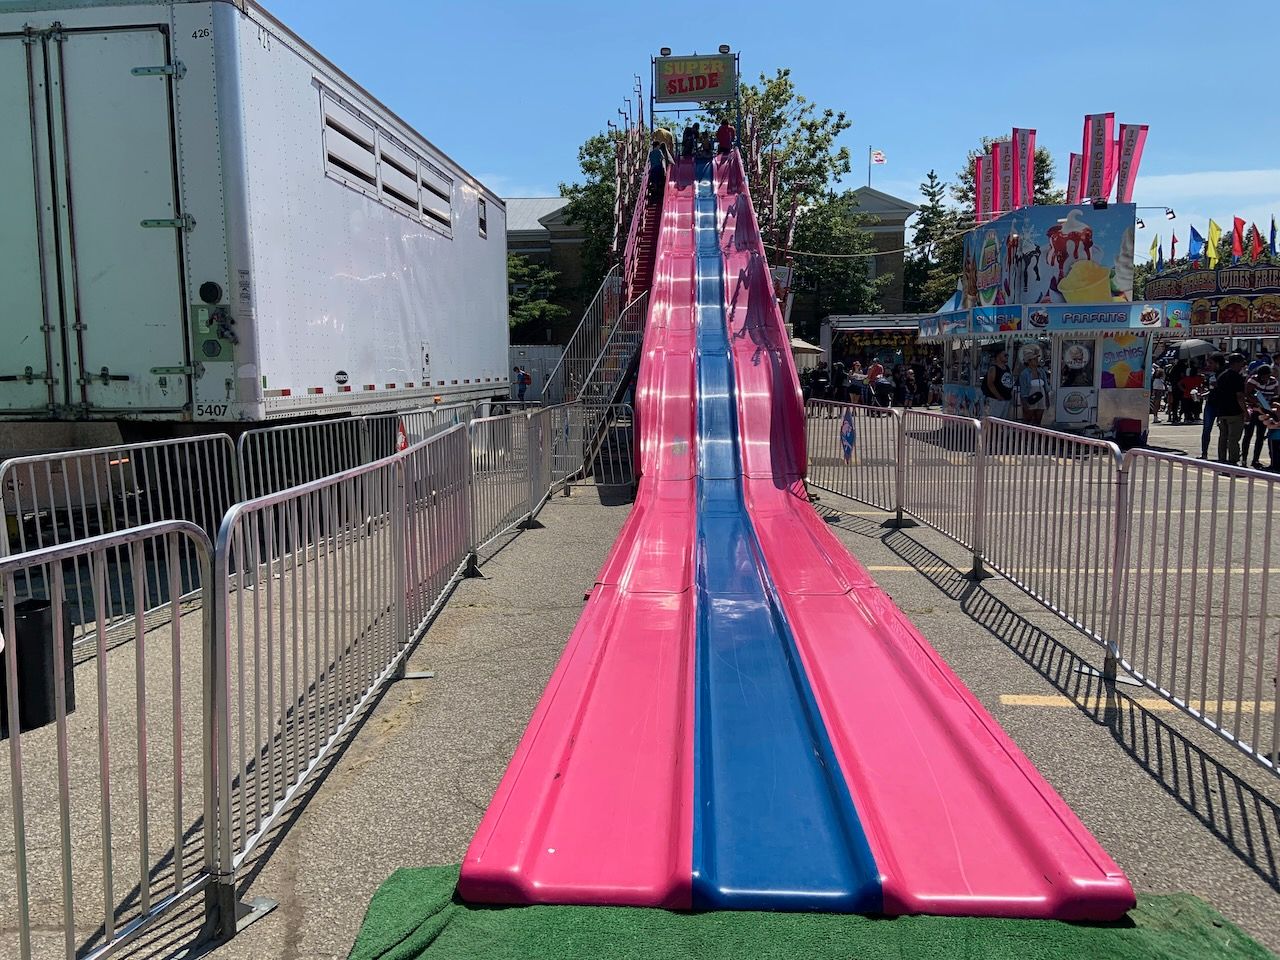 a super long slide with three adjacent lanes in pink and blue